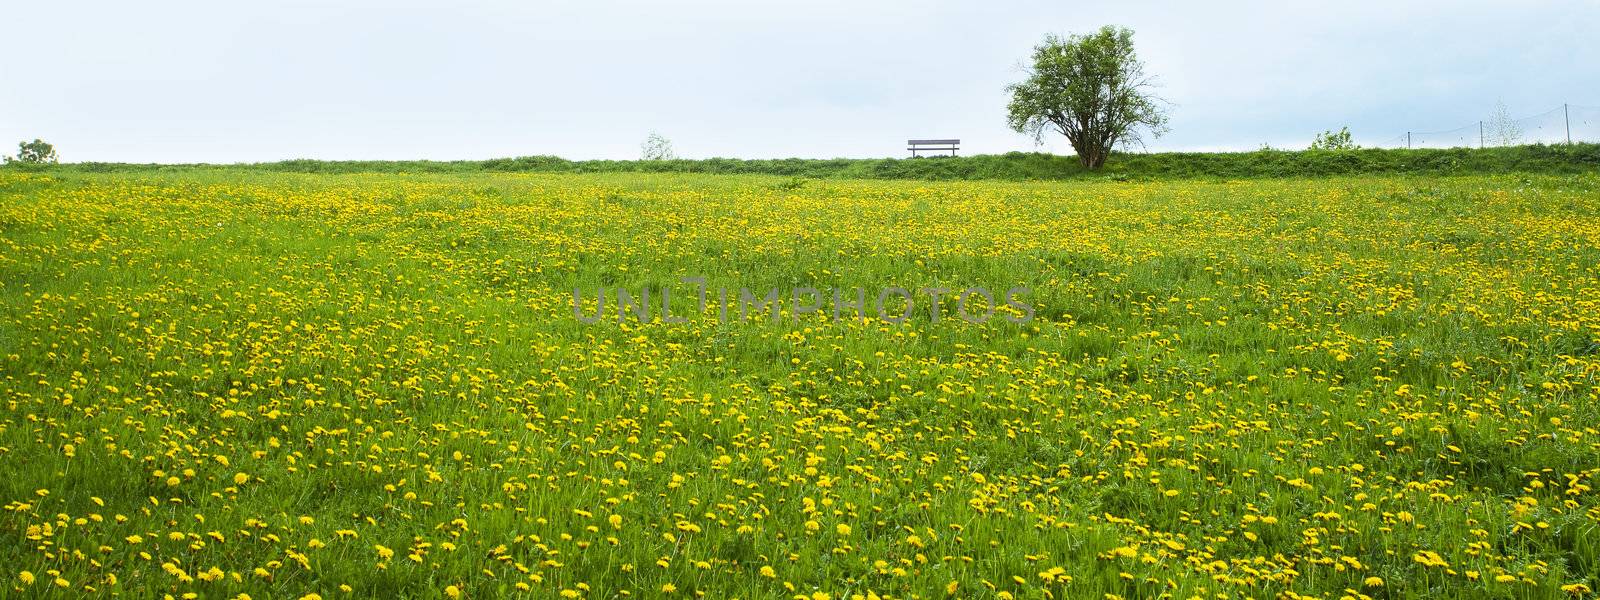 lonely tree and a bench on the field of dandelion against the sk by jannyjus